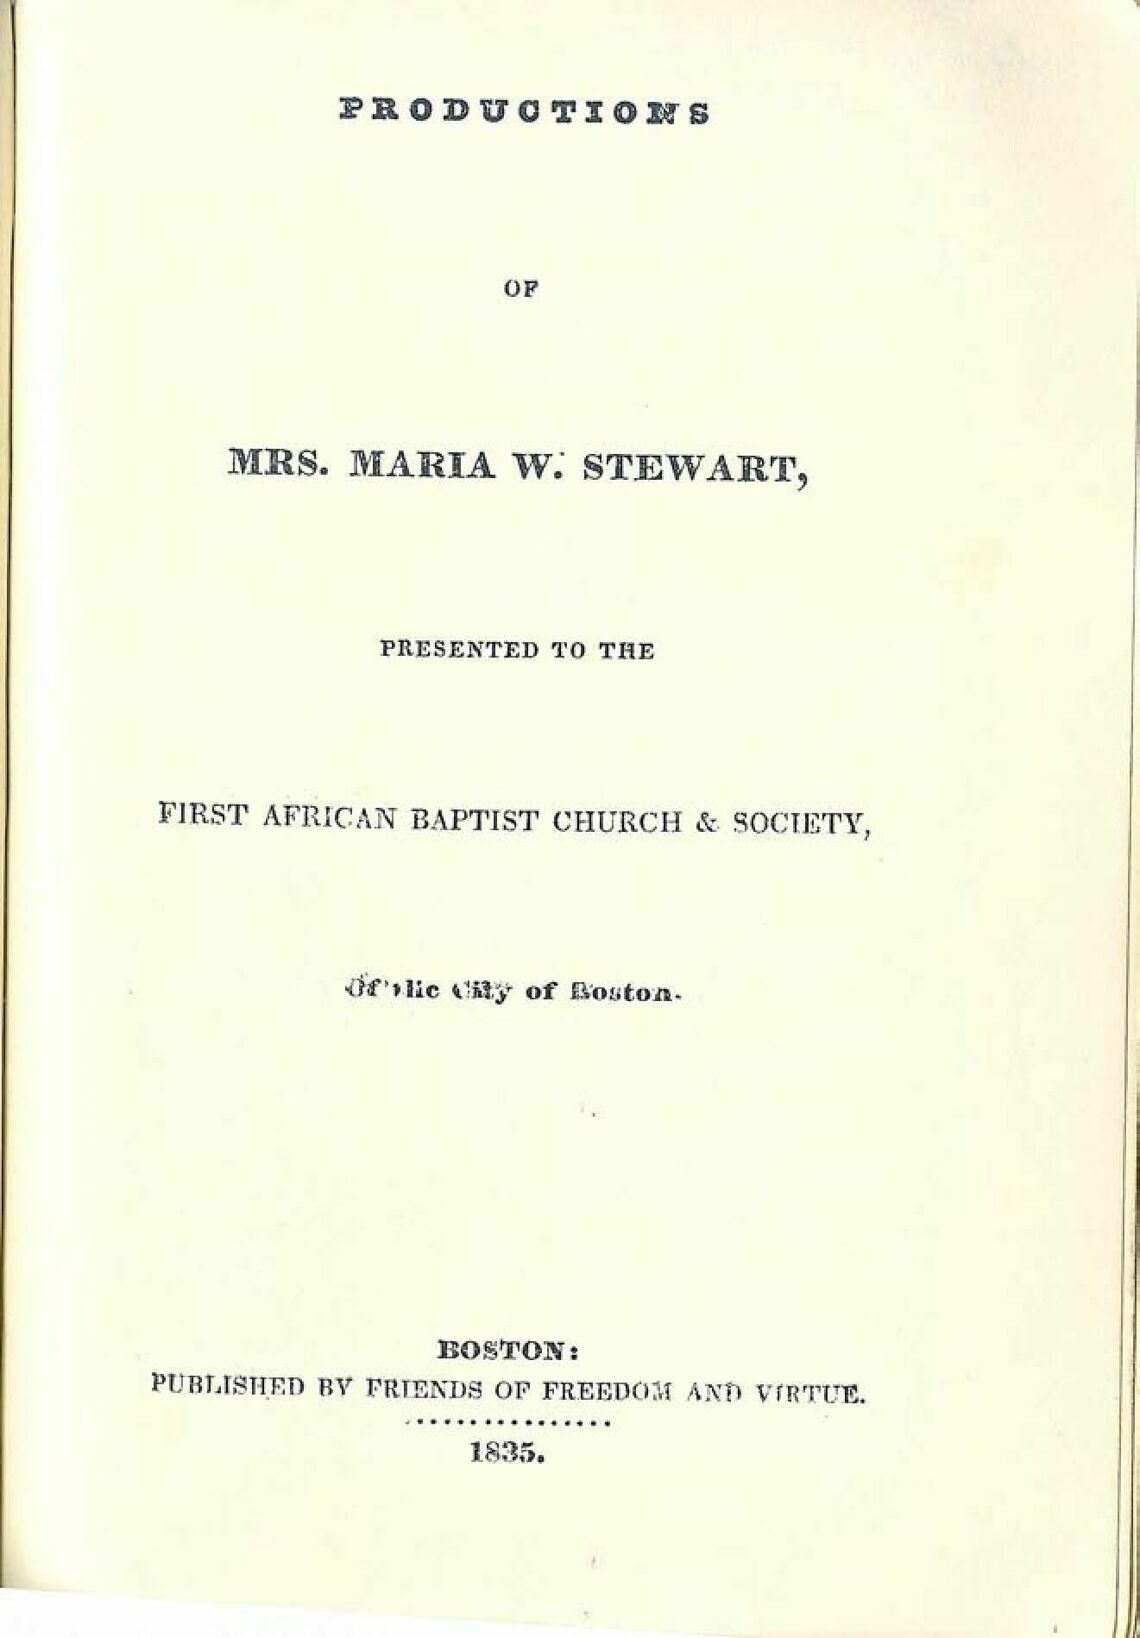 The title page from the 1835 collected works of Maria W. Stewart. The contents came from 1831-1835. This edition helped into print by her erstwhile fellow congregants at the Baptist church in Boston, though she had moved to New York City by 1835.